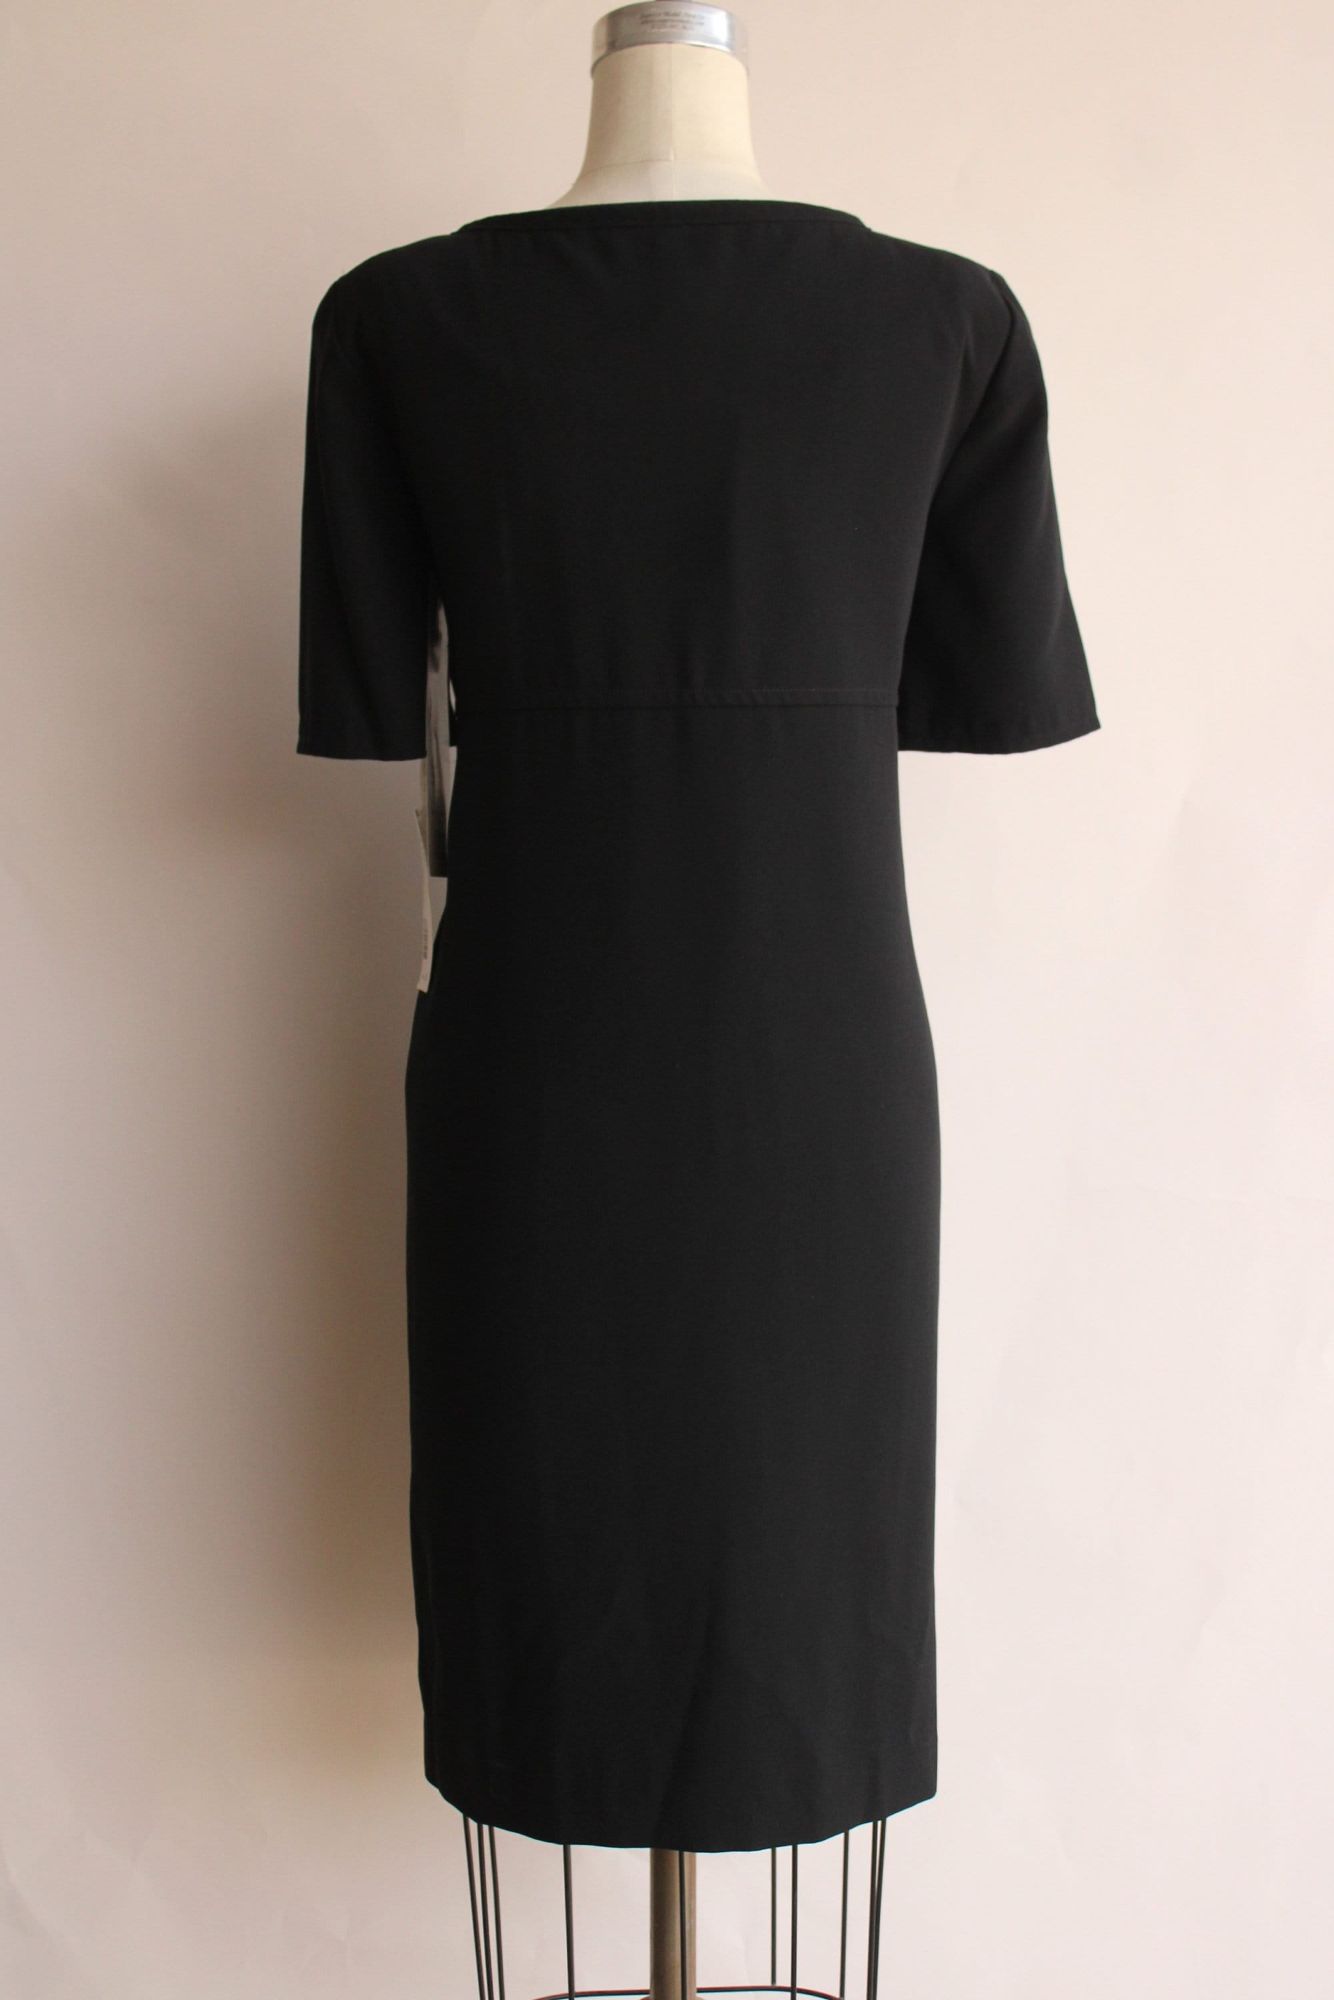 Vintage 1990s New with Tags Rena Rowan for Saville Black Dress